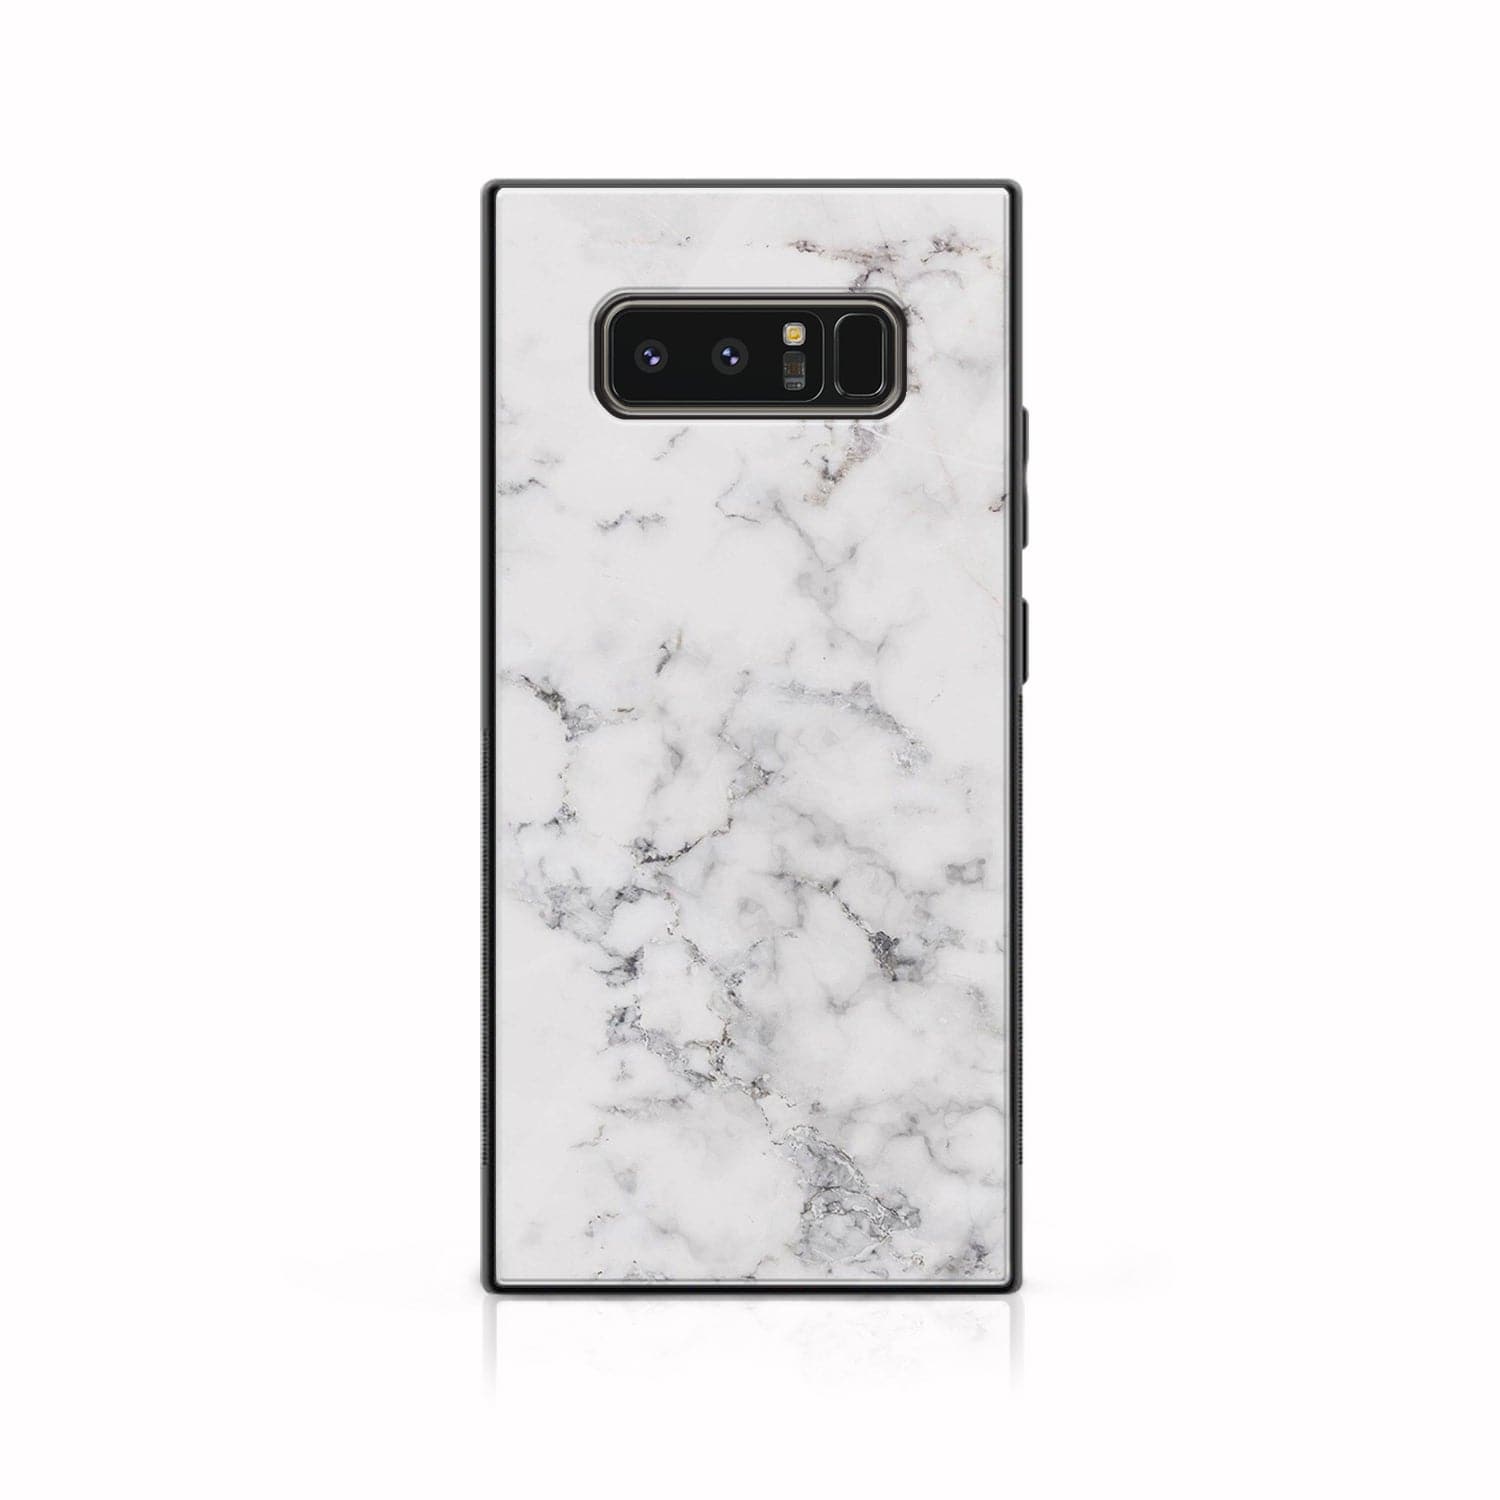 Galaxy Note 8 - White Marble Series - Premium Printed Glass soft Bumper shock Proof Case